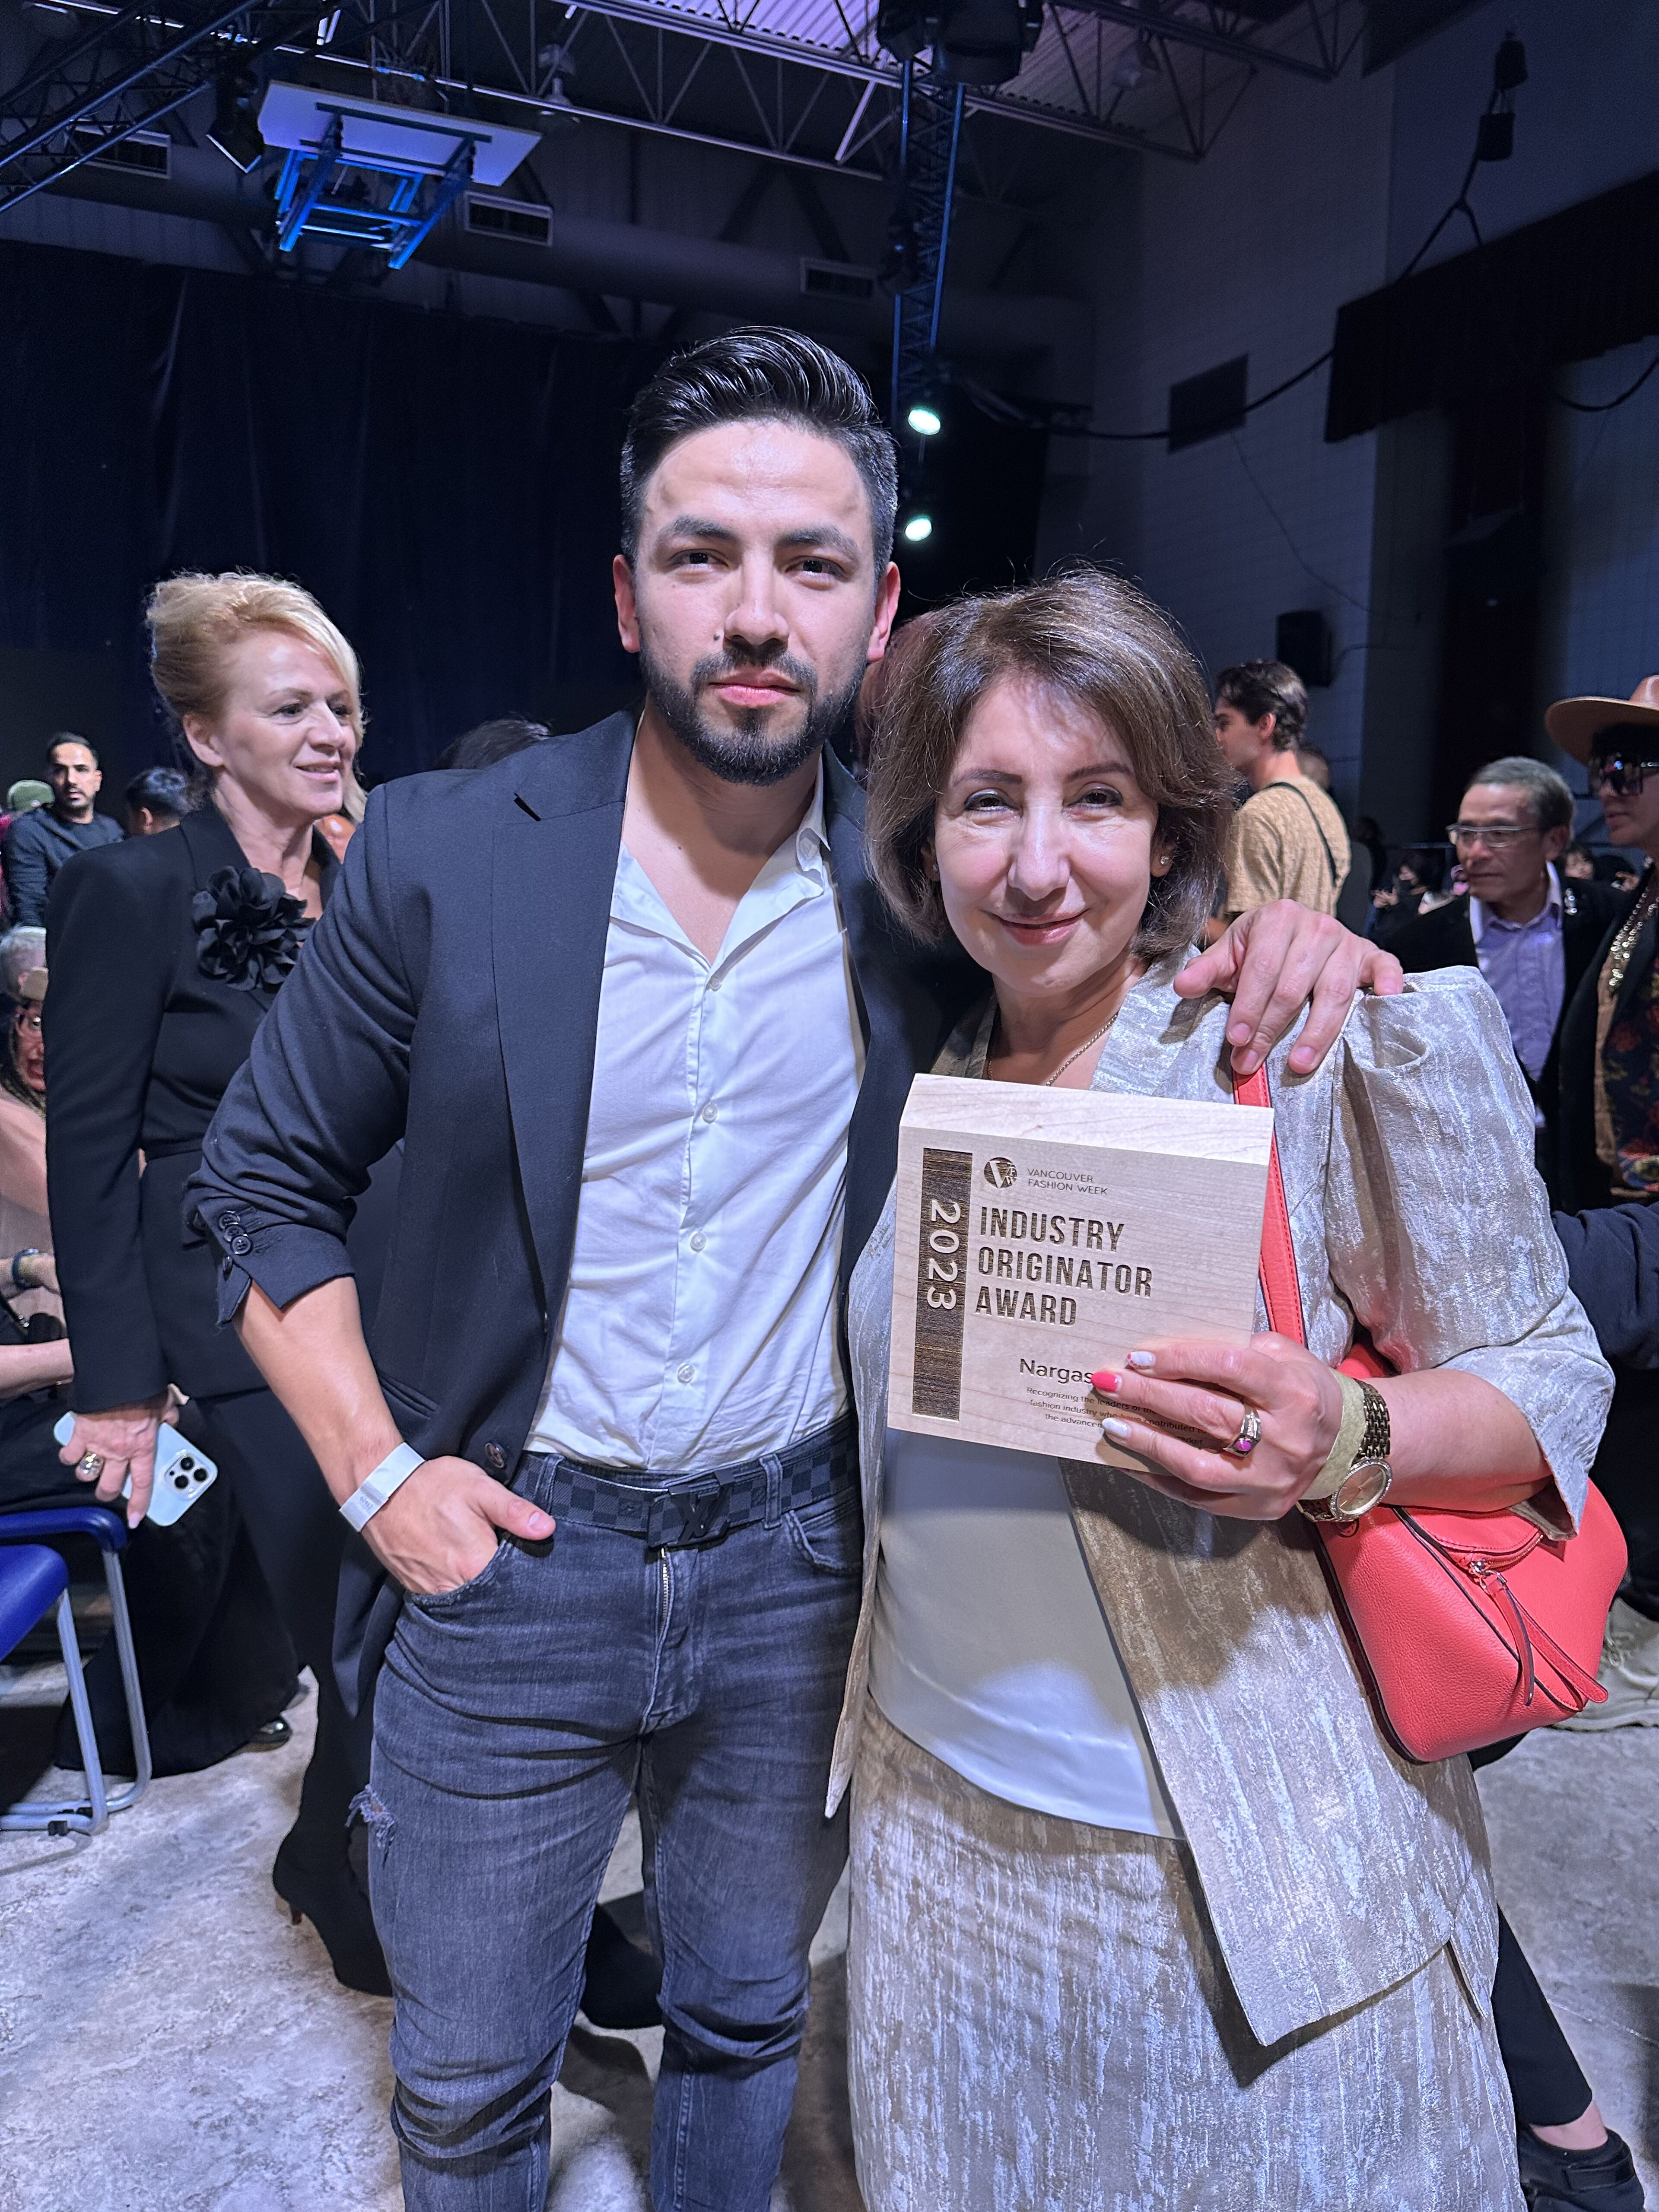 A man and a woman posing with an 'Industry Originator Award' at an event.